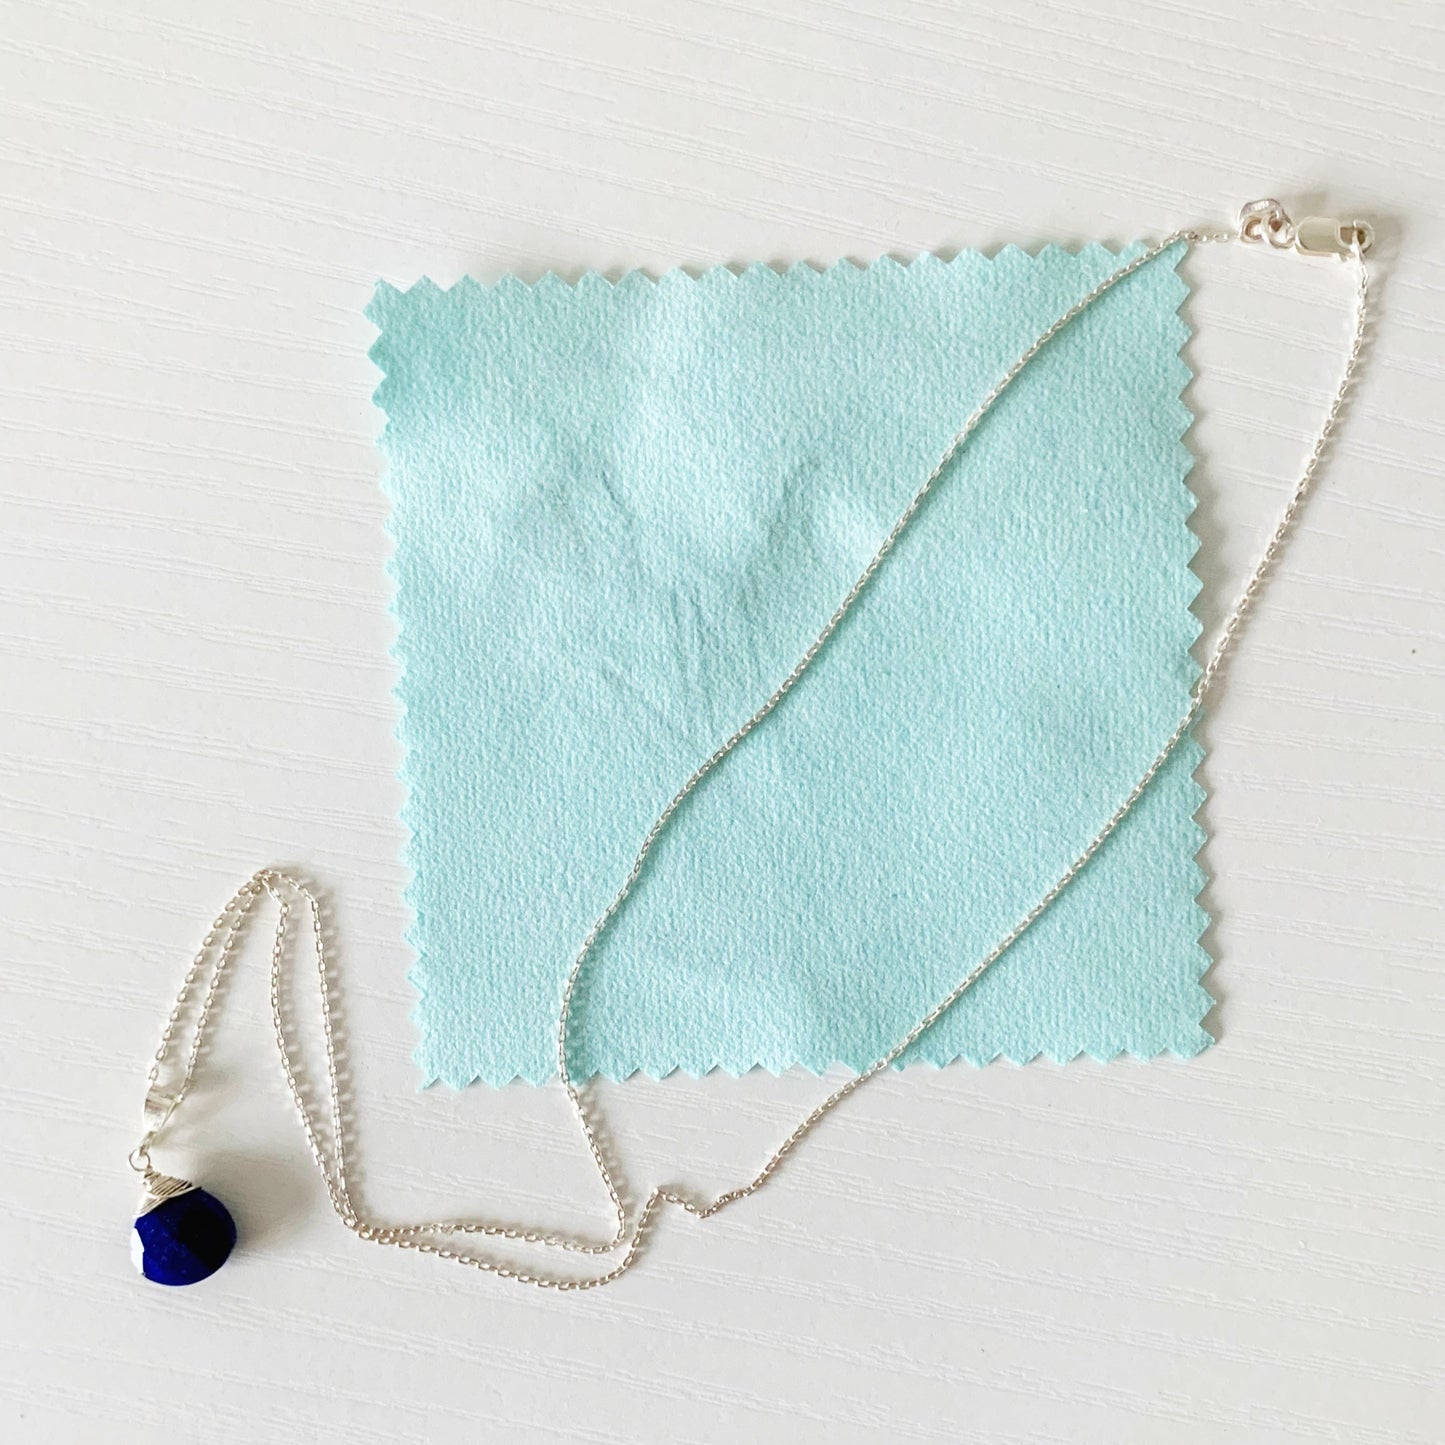 a light aqua jewelry polishing cloth with a few tarnish streaks on it and the mermaids and madeleine neptune necklace on top showing that the cloth can help renew the shine to sterling silver. all is photographed on white surface